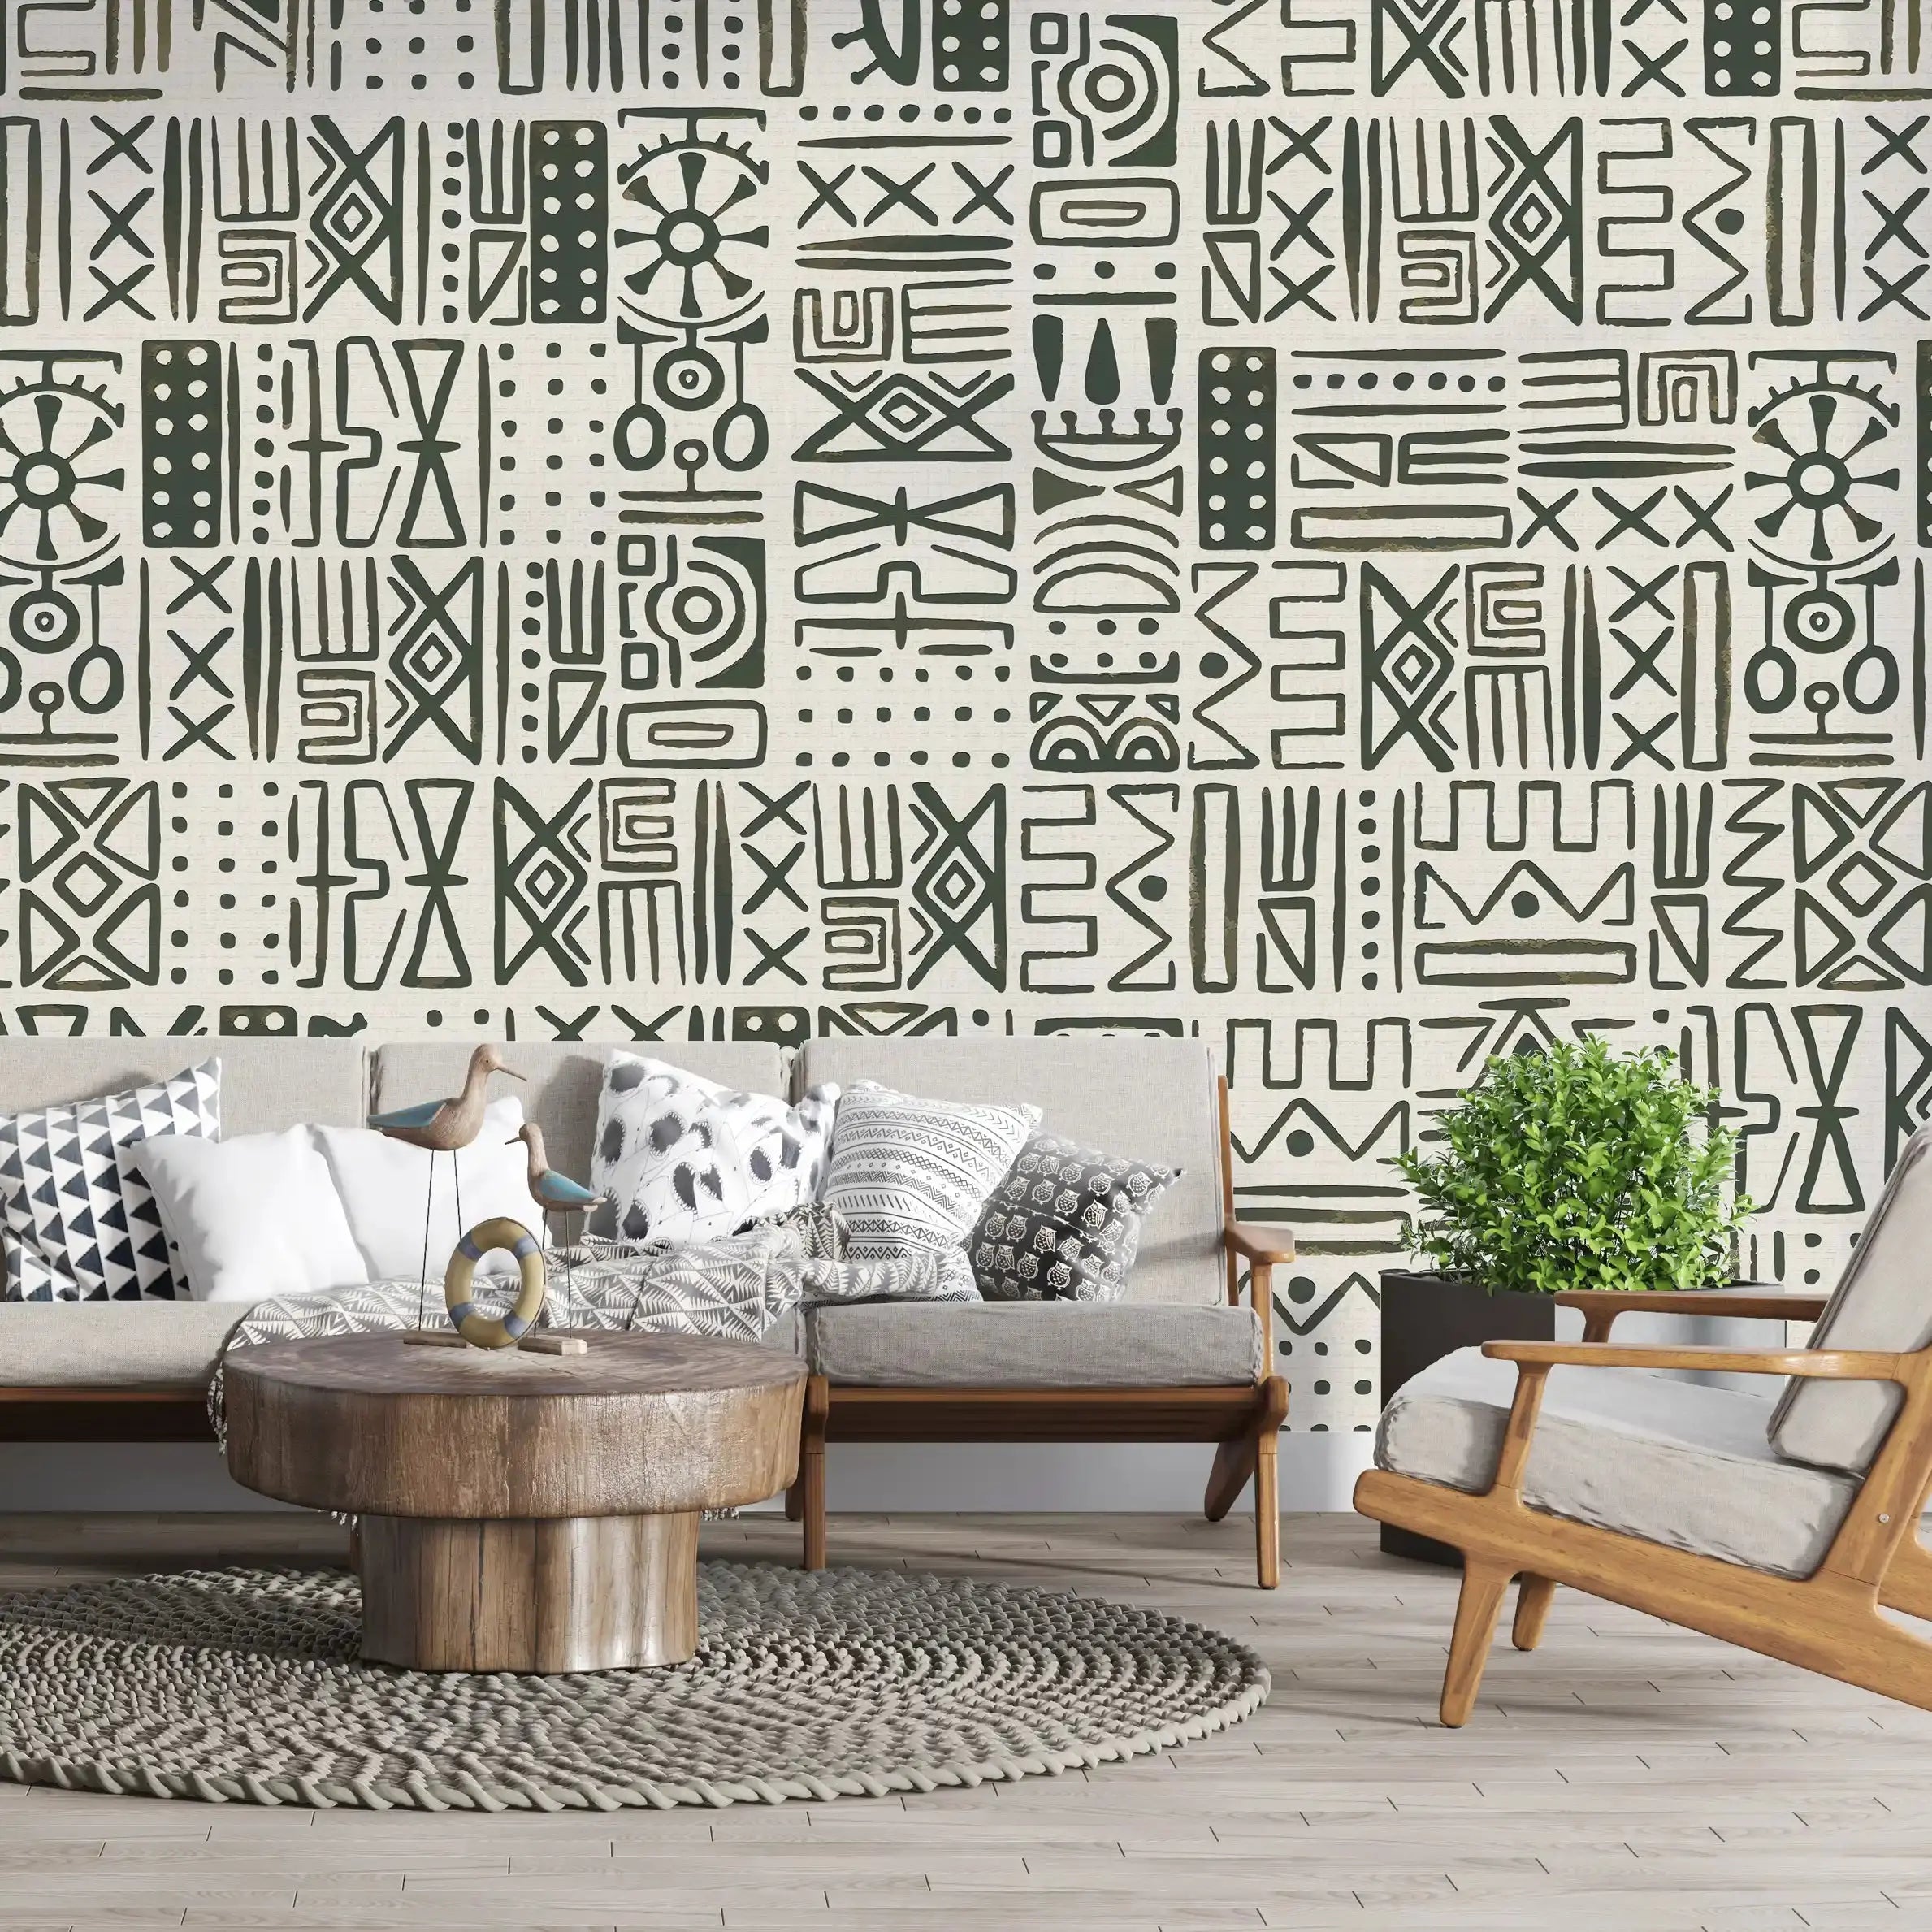 3030-A / African Inspired Peel and Stick Wallpaper, Geometric Khaki and Beige Patterns Wall Mural - Artevella